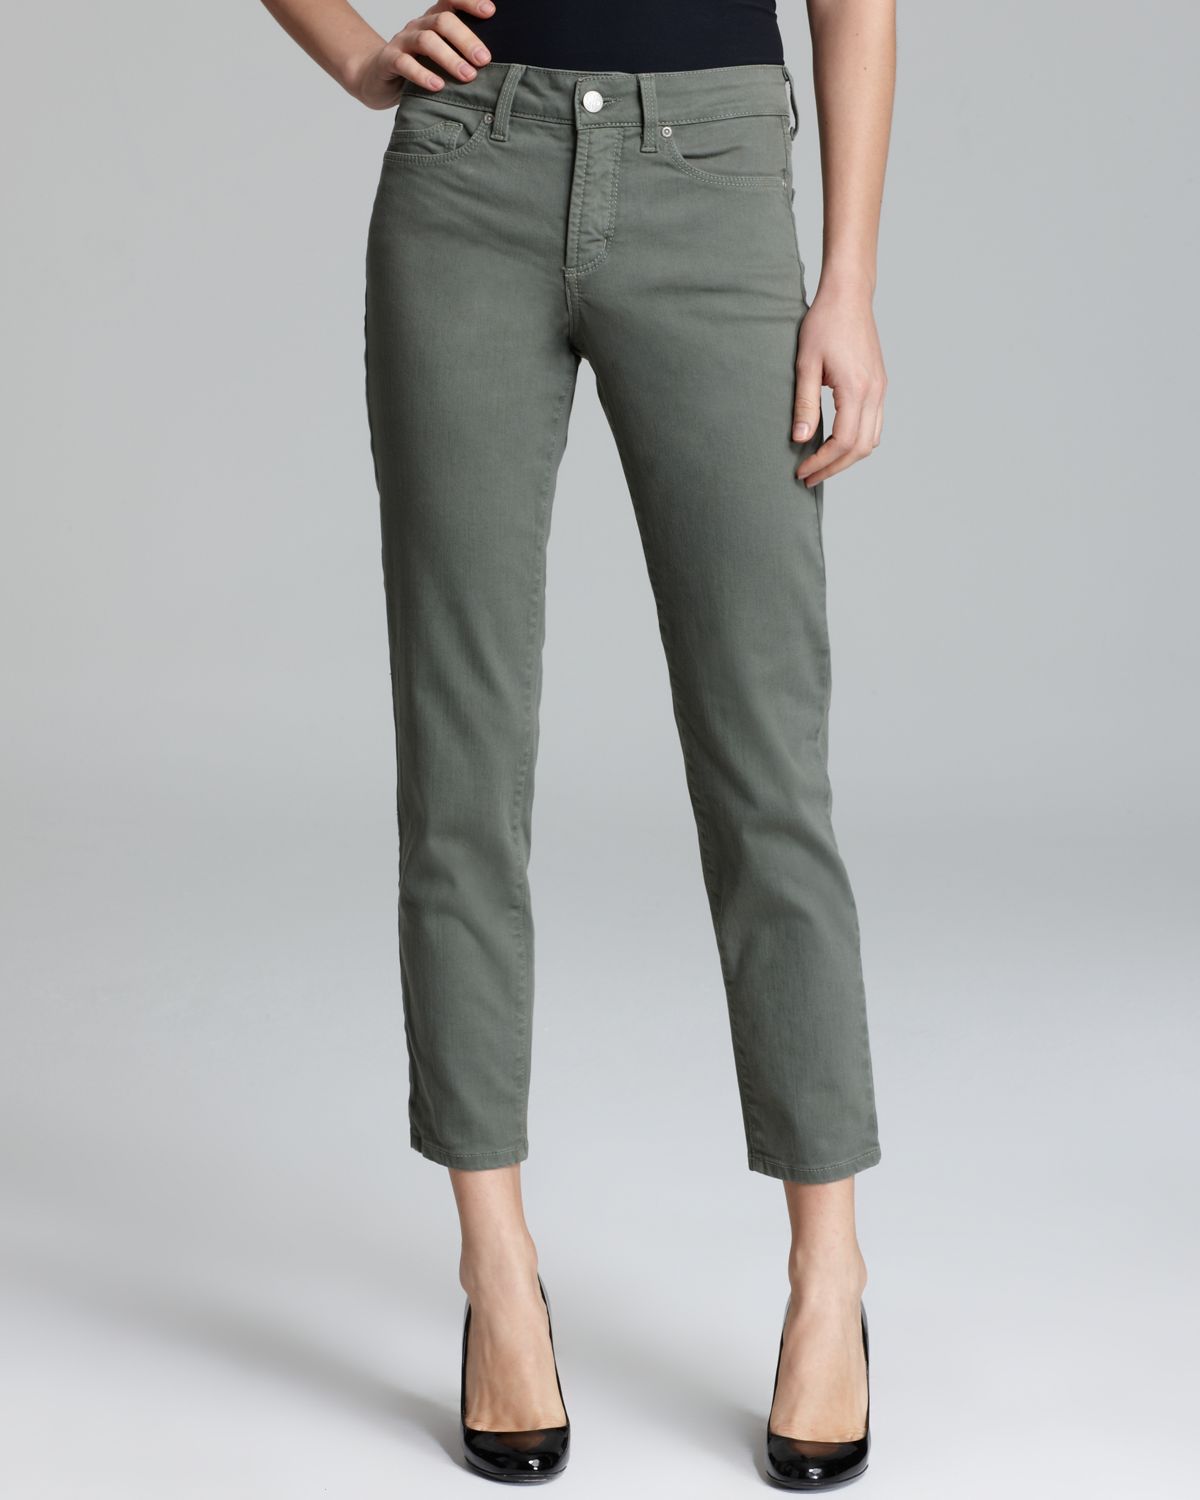 Nydj Alisha Fitted Ankle Jeans in Green (Rosemary) | Lyst